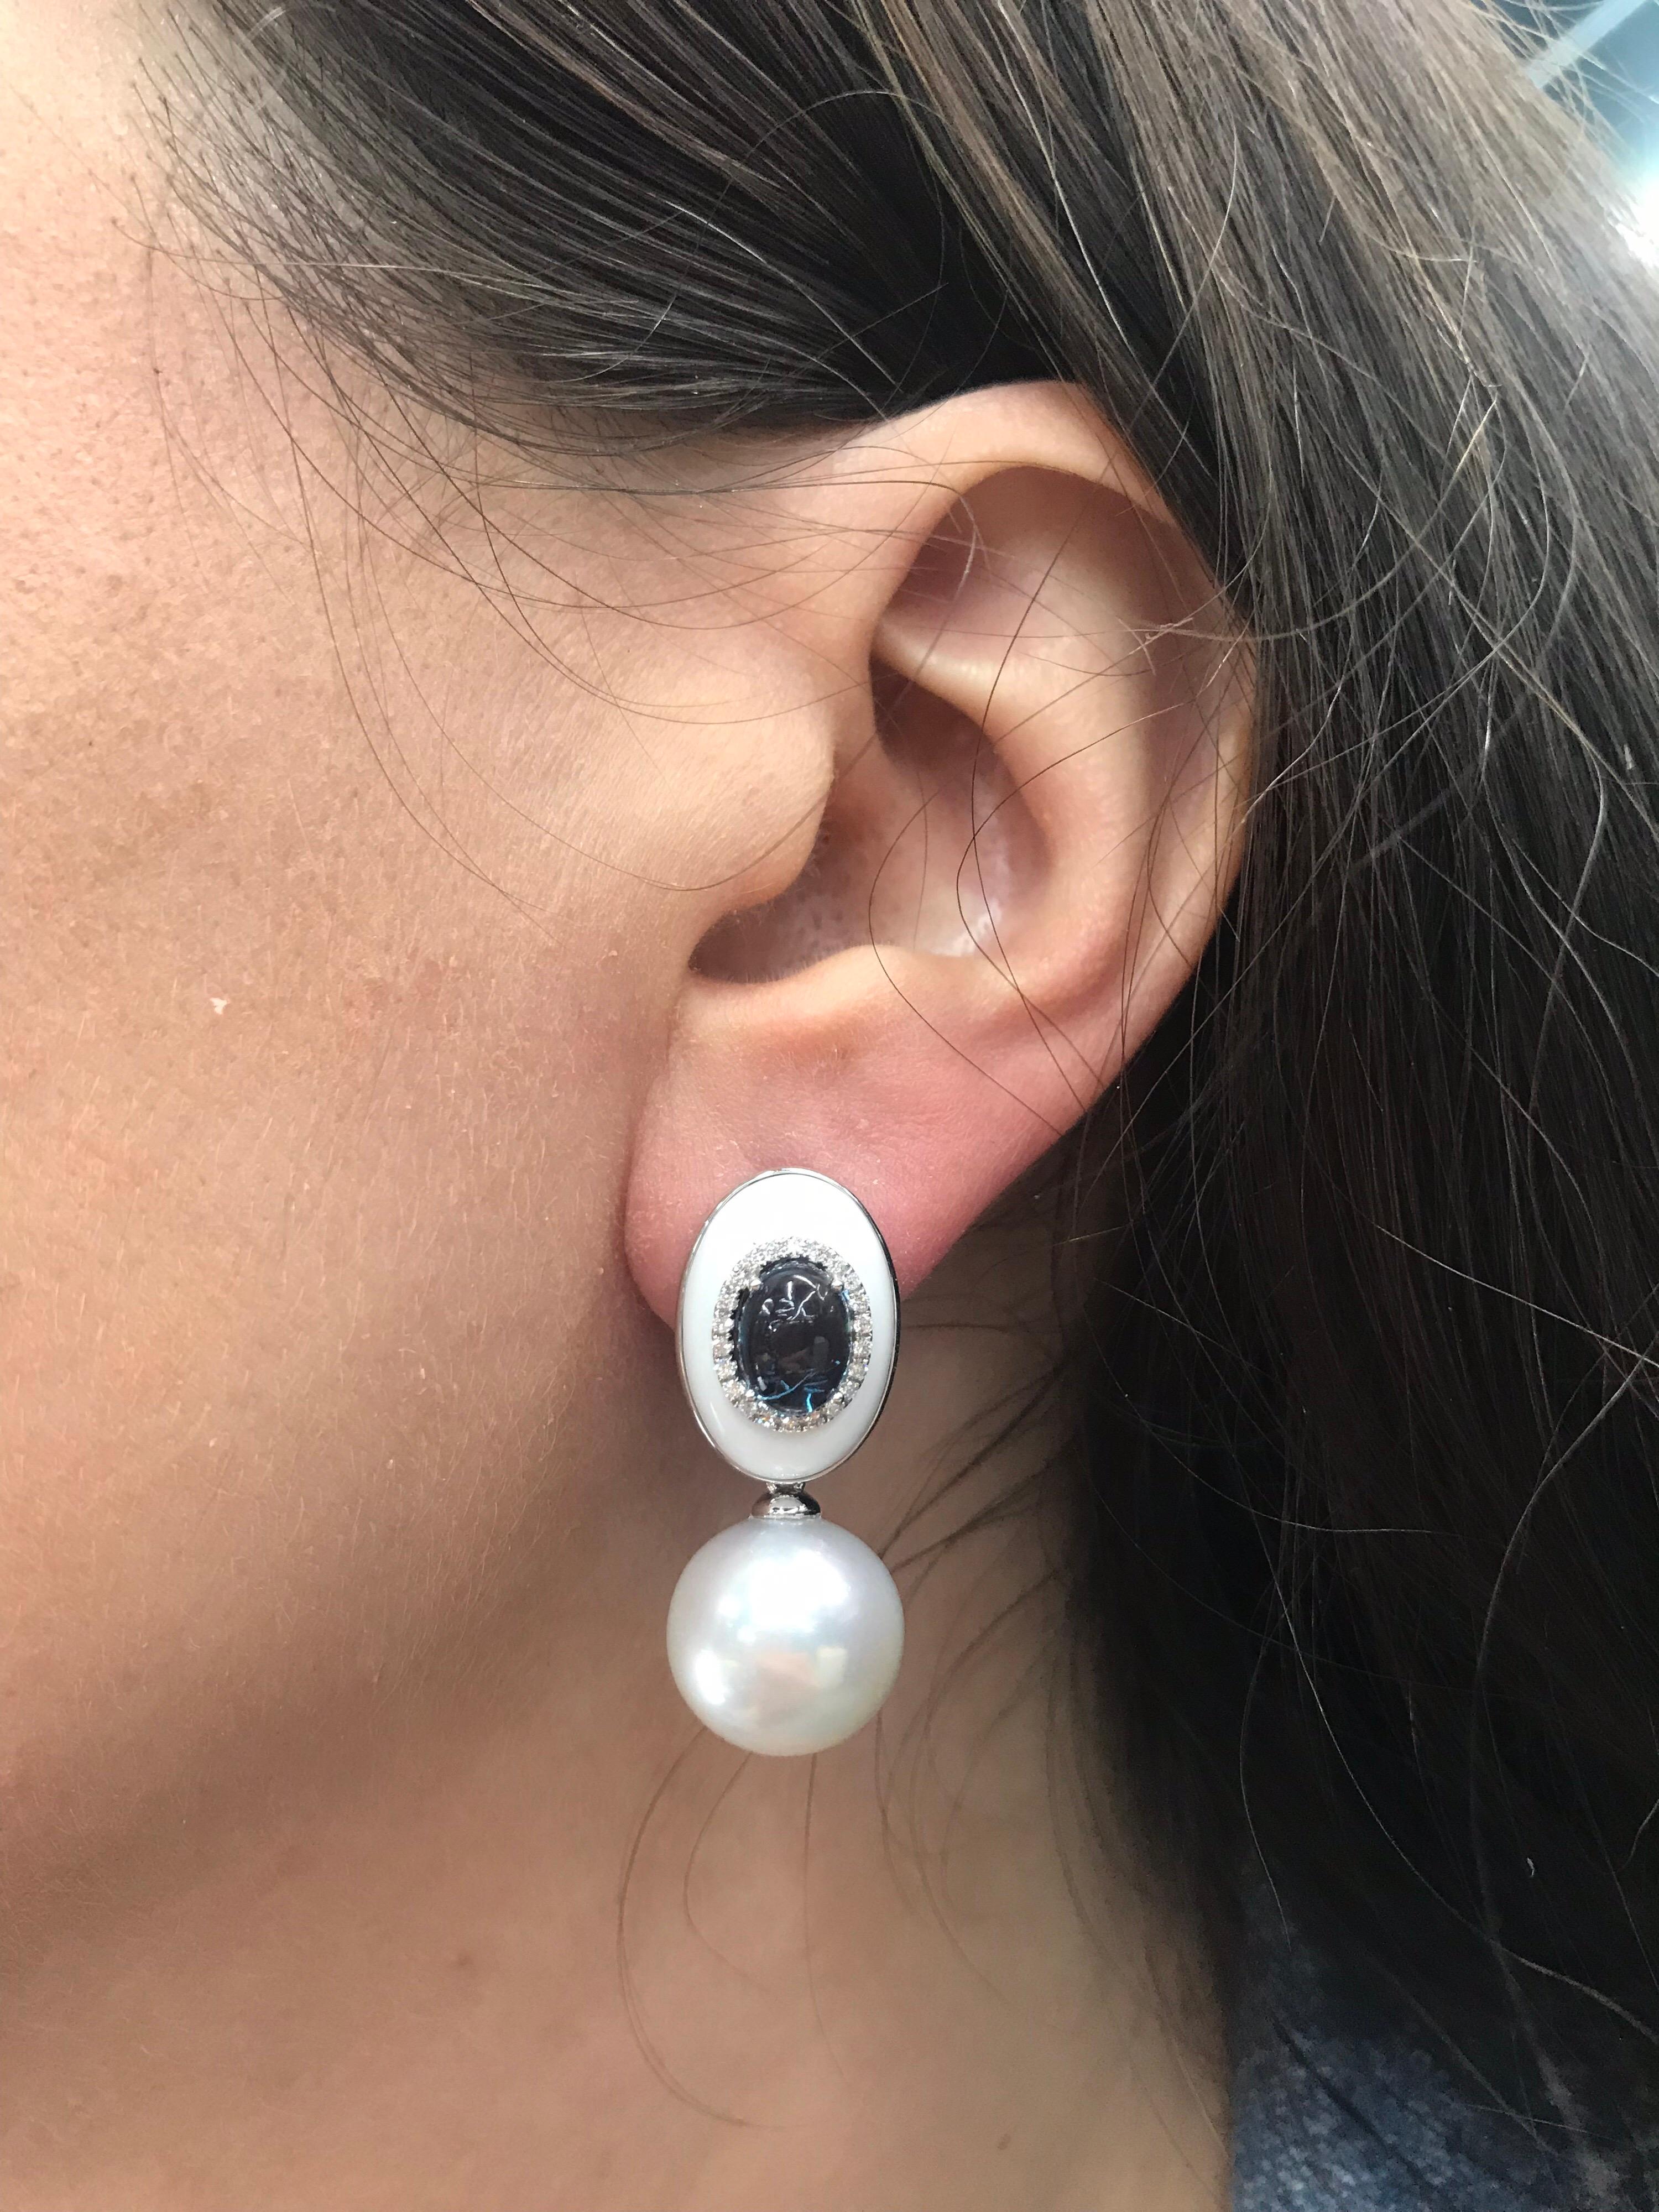 18K White Gold drop earrings featuring two South Sea Pearls, 13-14mm, agate and blue topaz with a diamond halo.
Diamonds: 0.21 CT
Blue Topaz: 3.50 CT